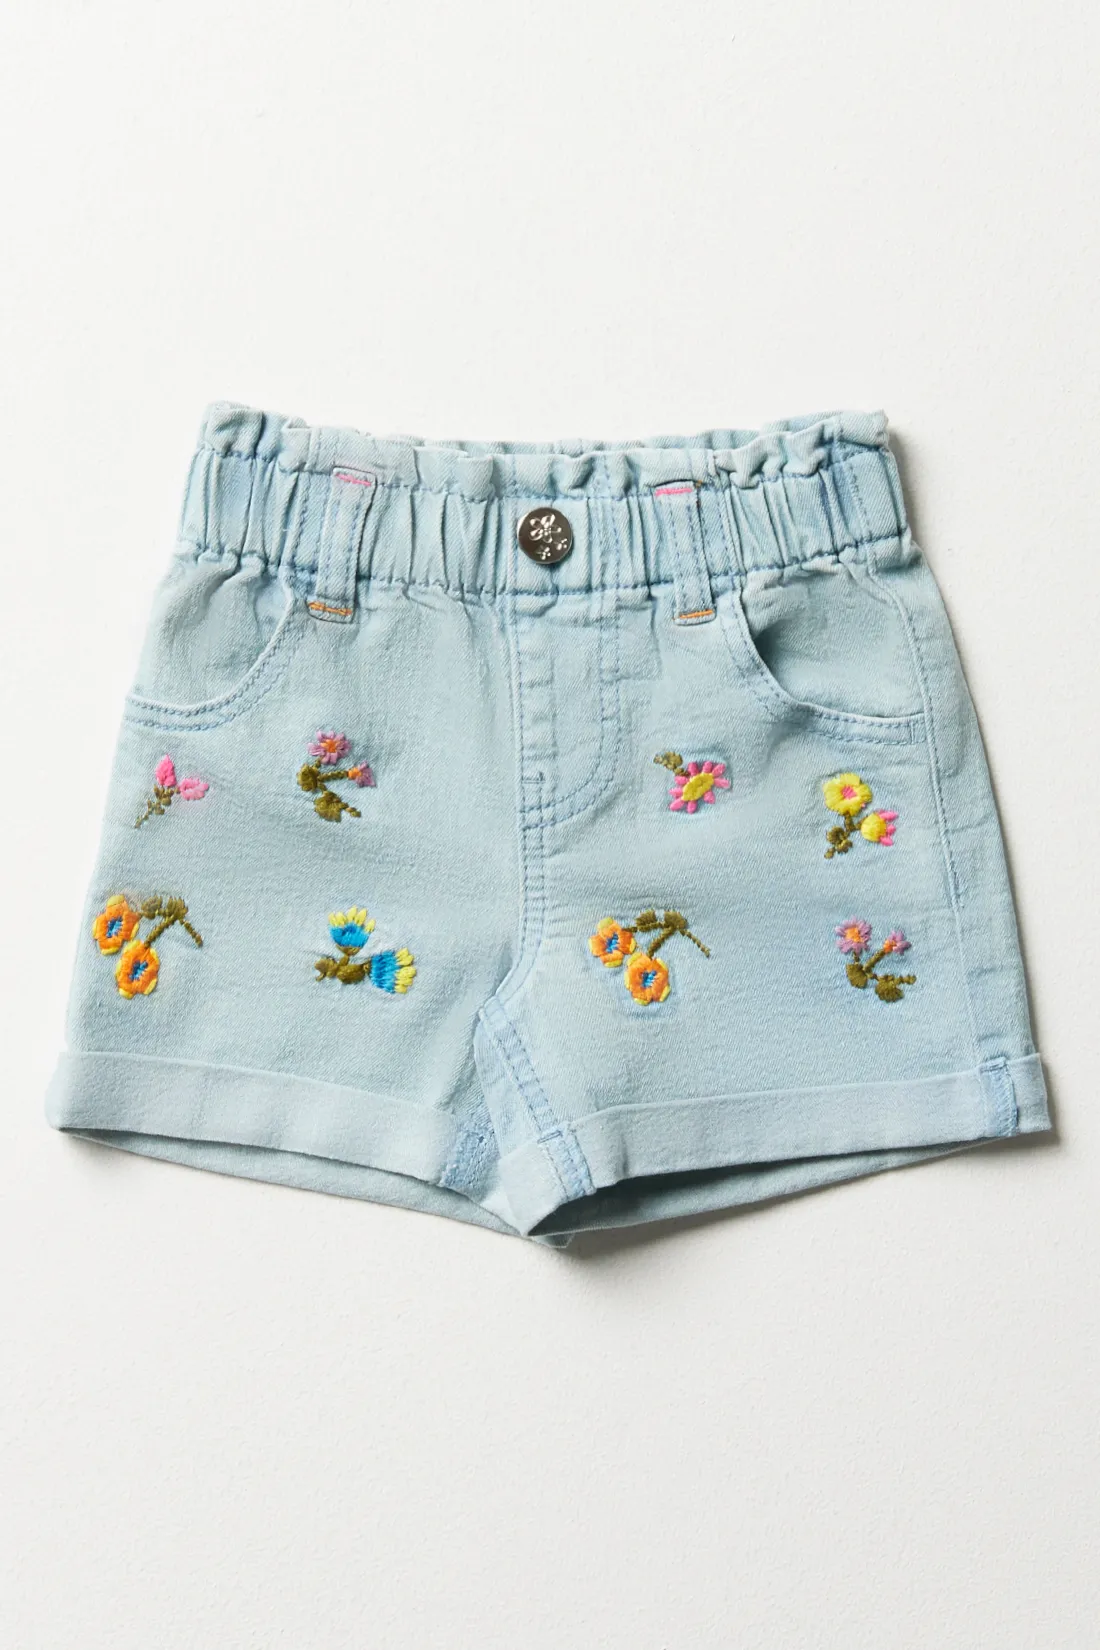 Flower embroidery paper bag denim shorts blue - GIRLS 2-10 YEARS ...